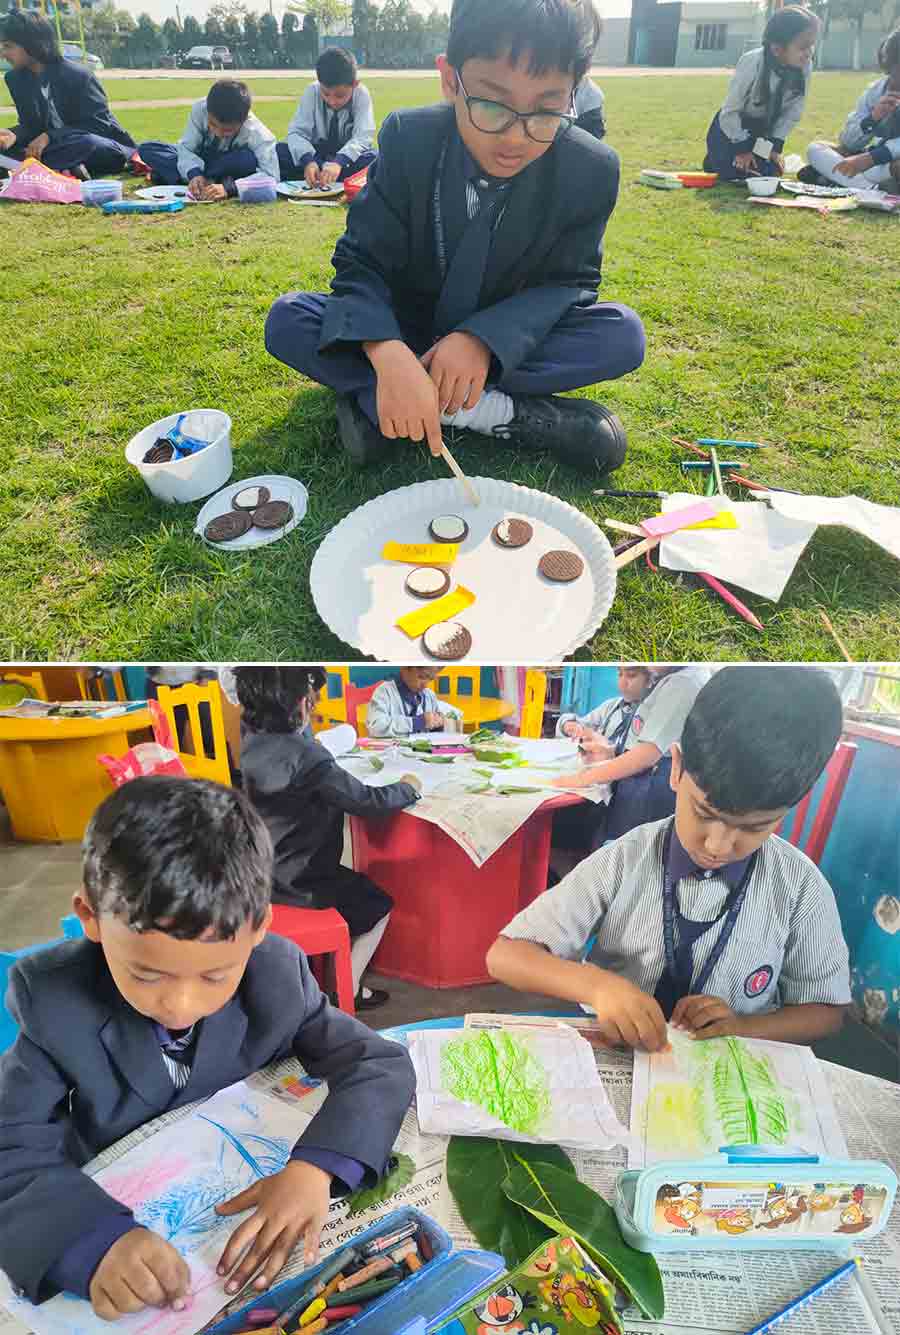 On National Science Day, Techno India Group Public School-Garia held fun educational activities such as crayon leaf printing, crafting various phases of the moon using Oreo biscuits and more for the children  